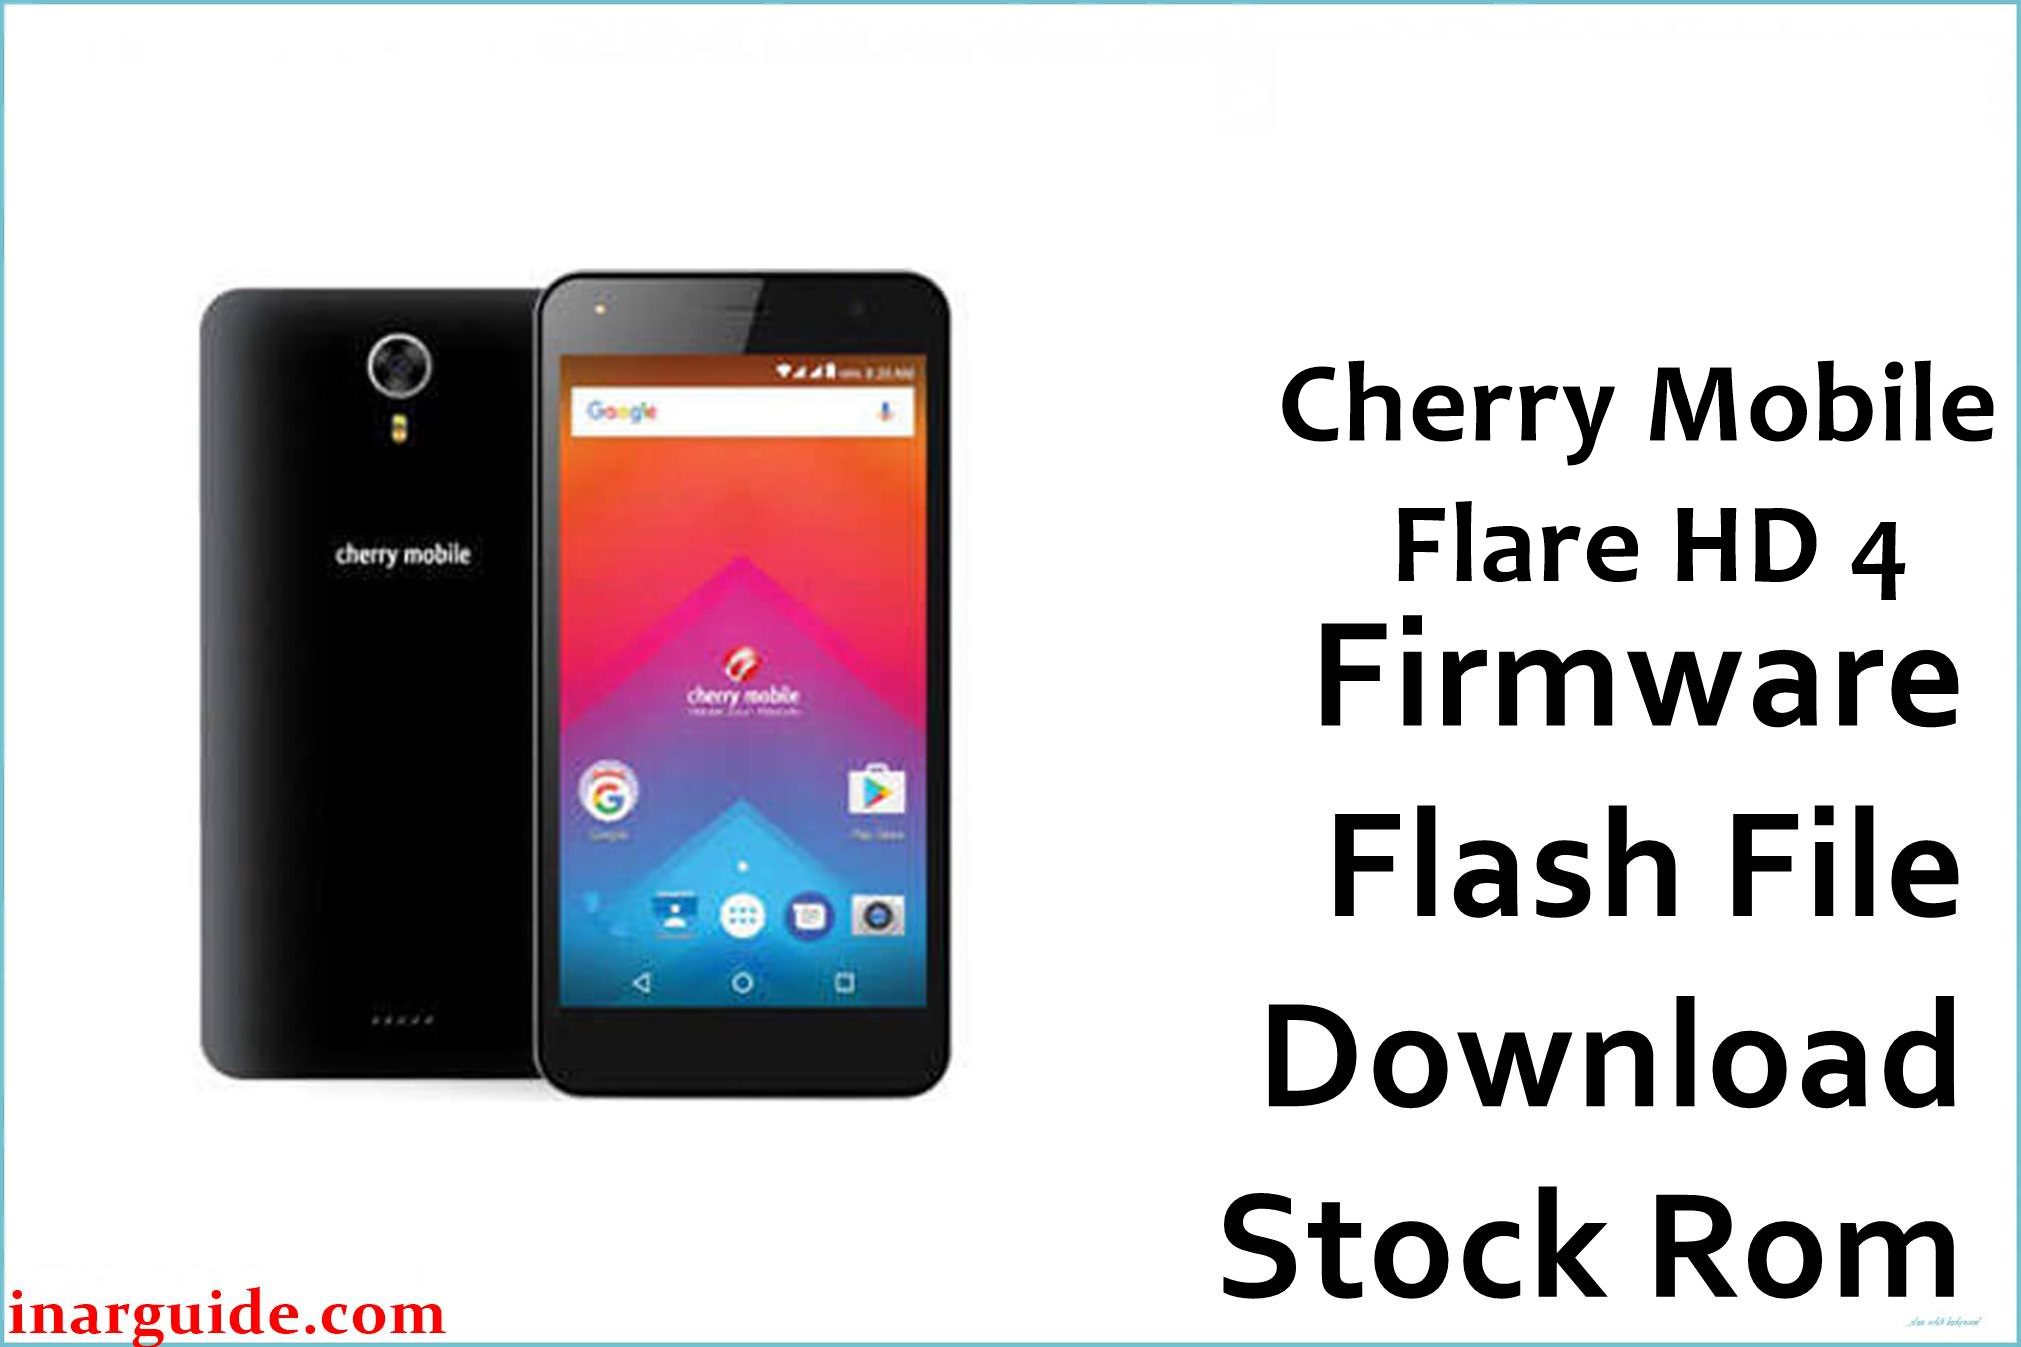 Cherry Mobile Flare HD 4